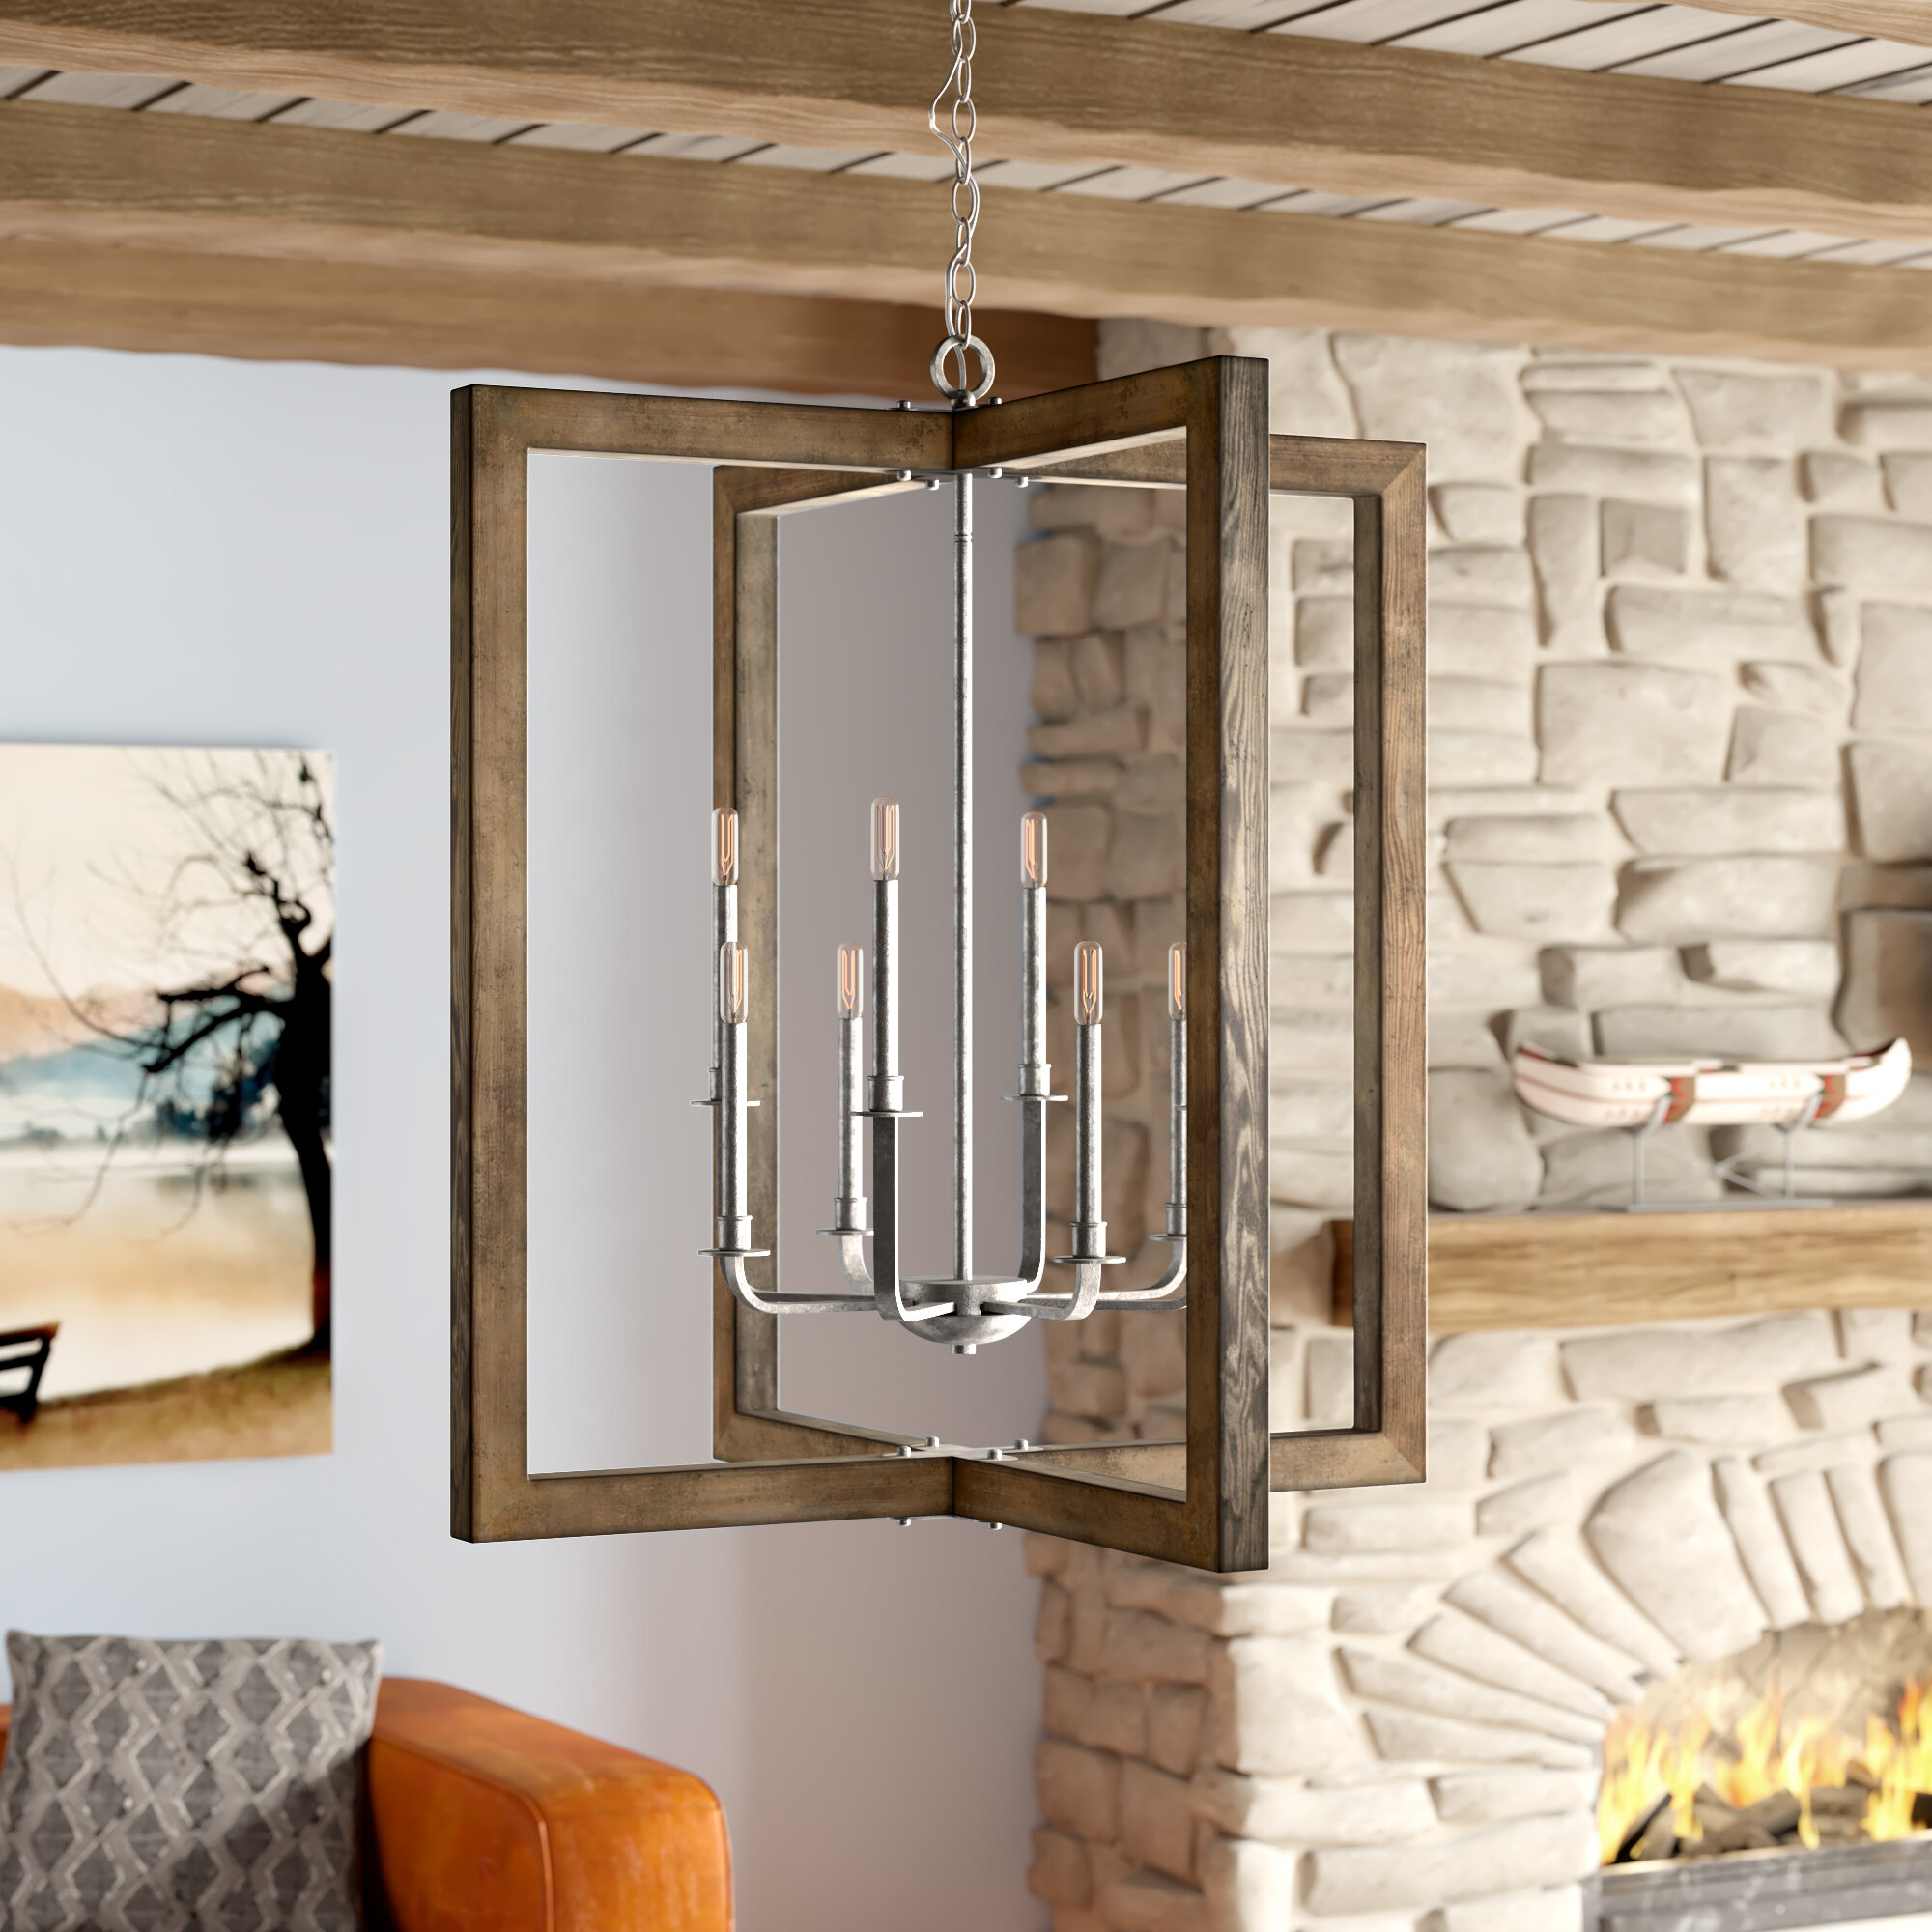 Union Rustic Daugherty 8 Light Lantern Rectangle Chandelier With